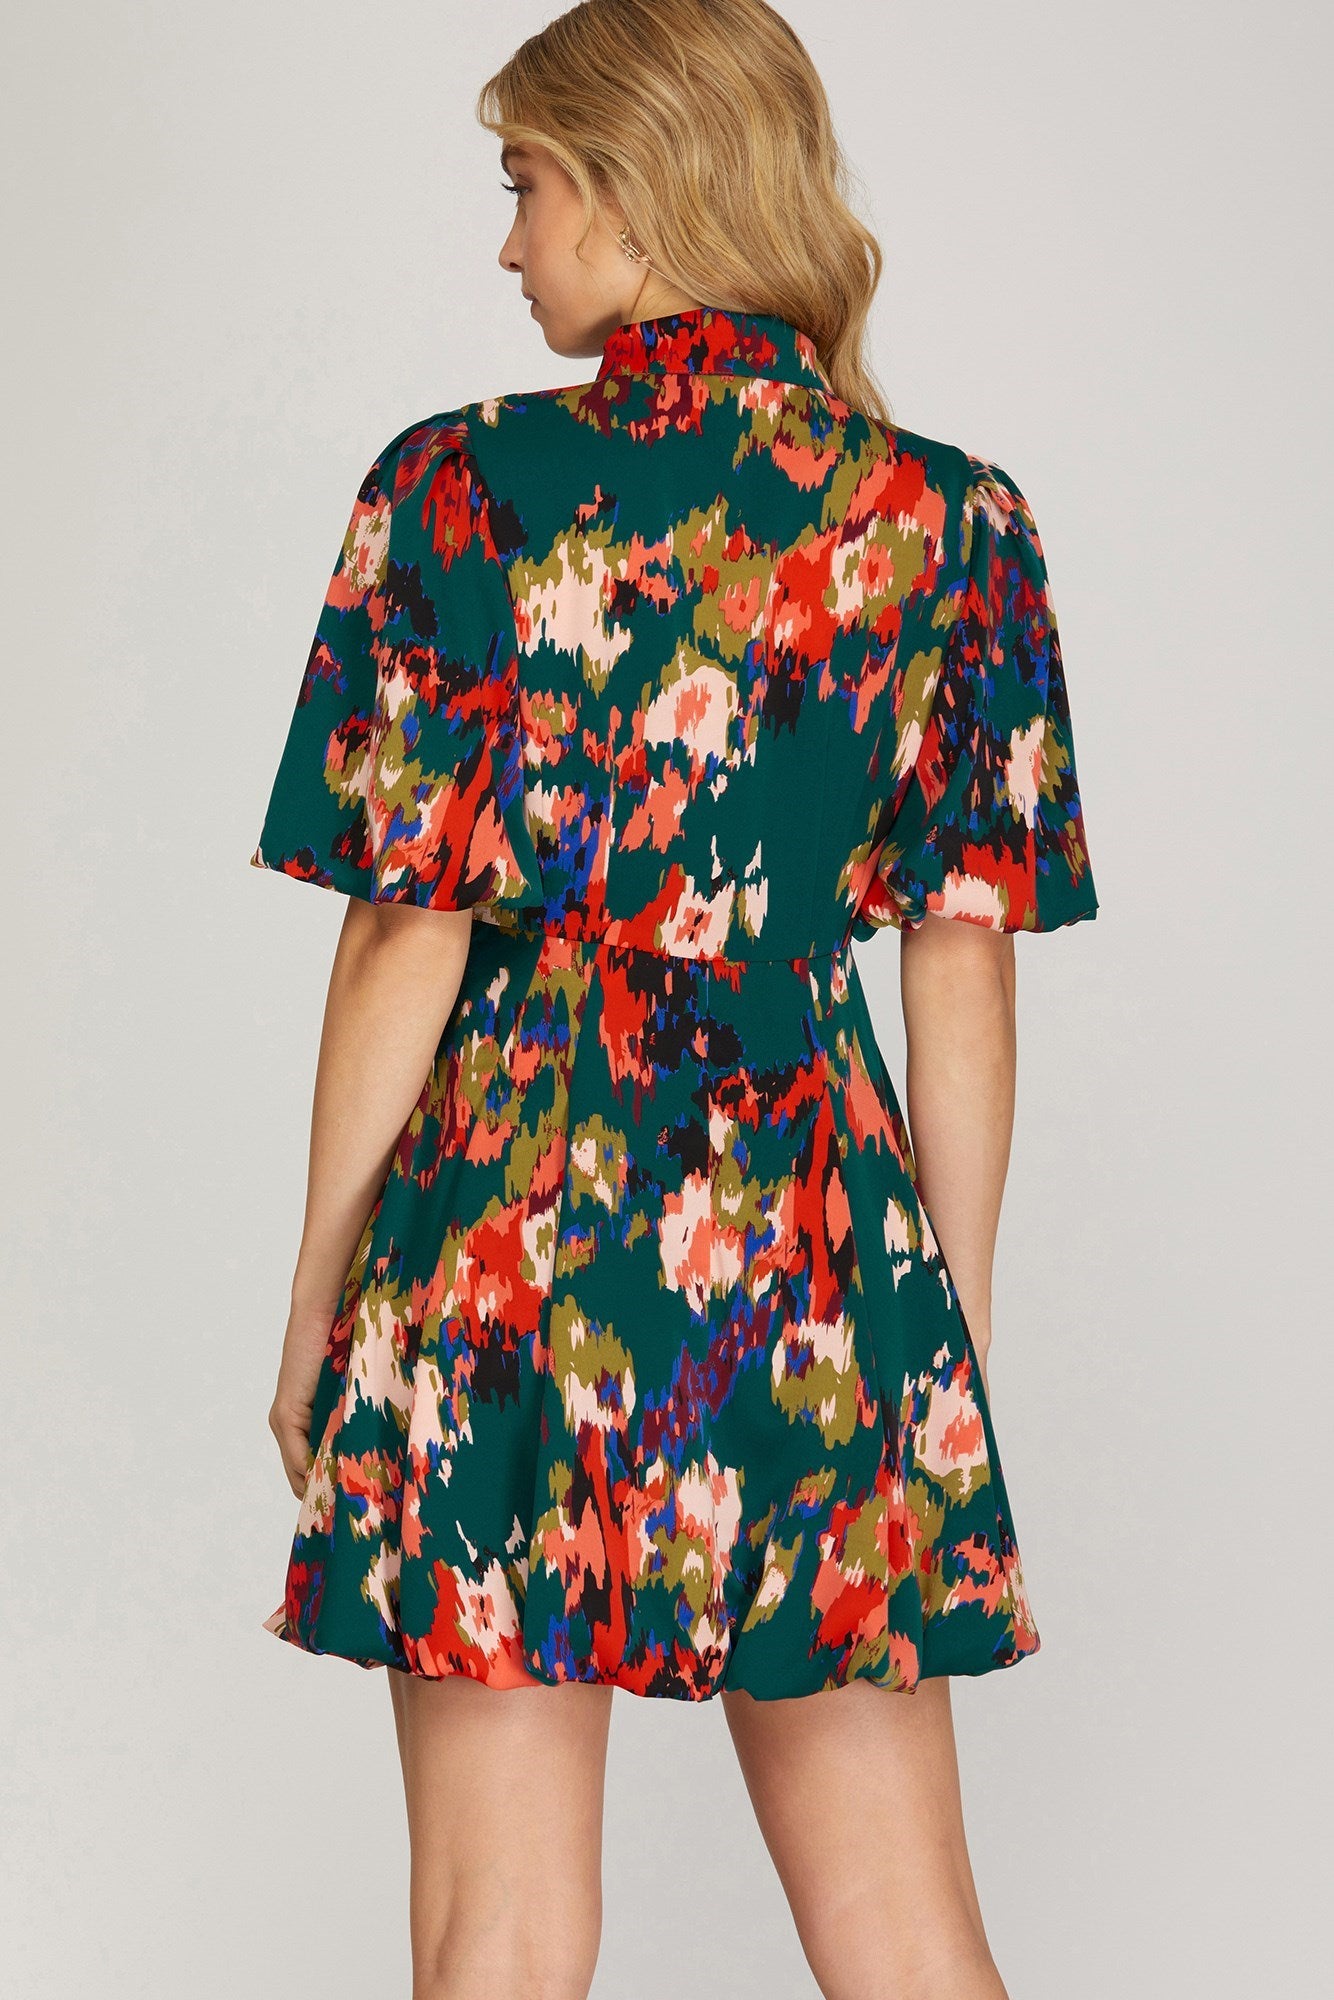 BUBBLE SLEEVE BUTTON DOWN PRINTED WOVEN DRESS WITH BUBBLE SKIRT HEM - The Season Boutique